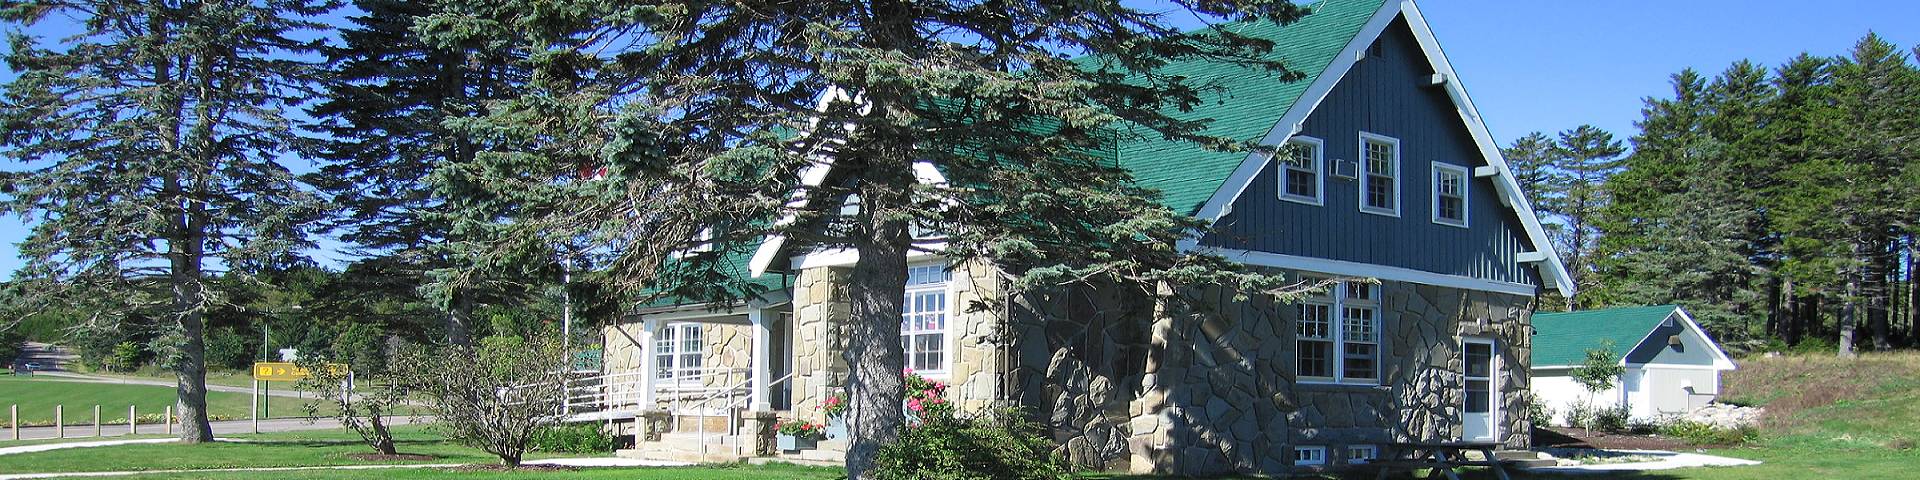 The visitor information center building